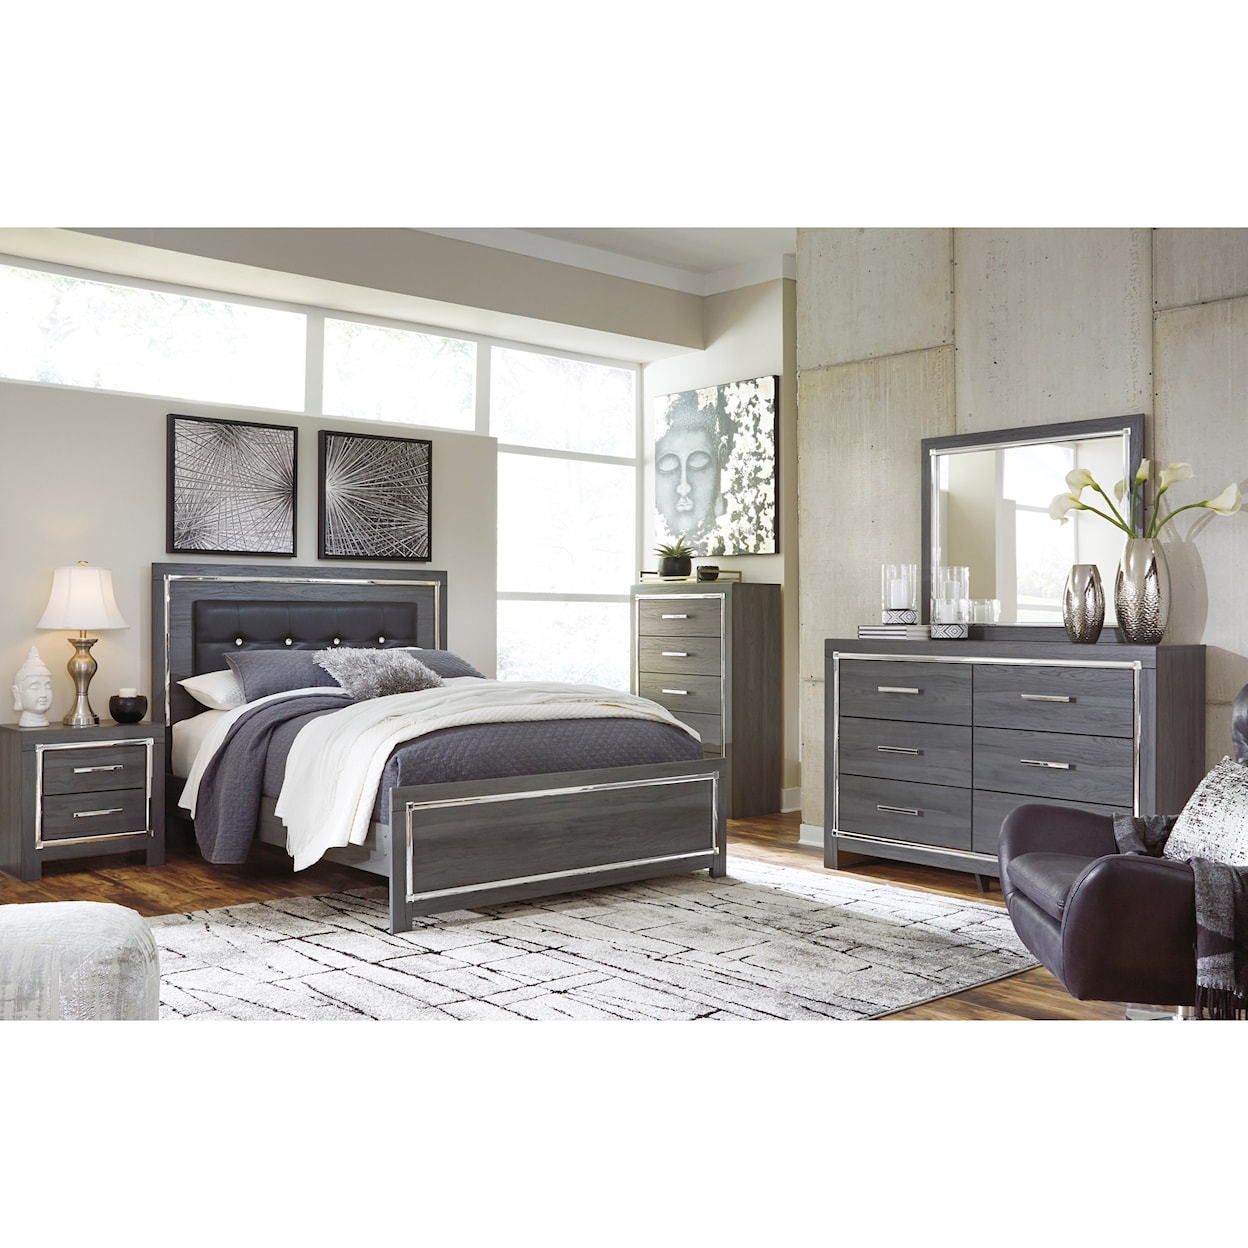 Signature Design by Ashley Furniture Lodanna Queen Bedroom Group